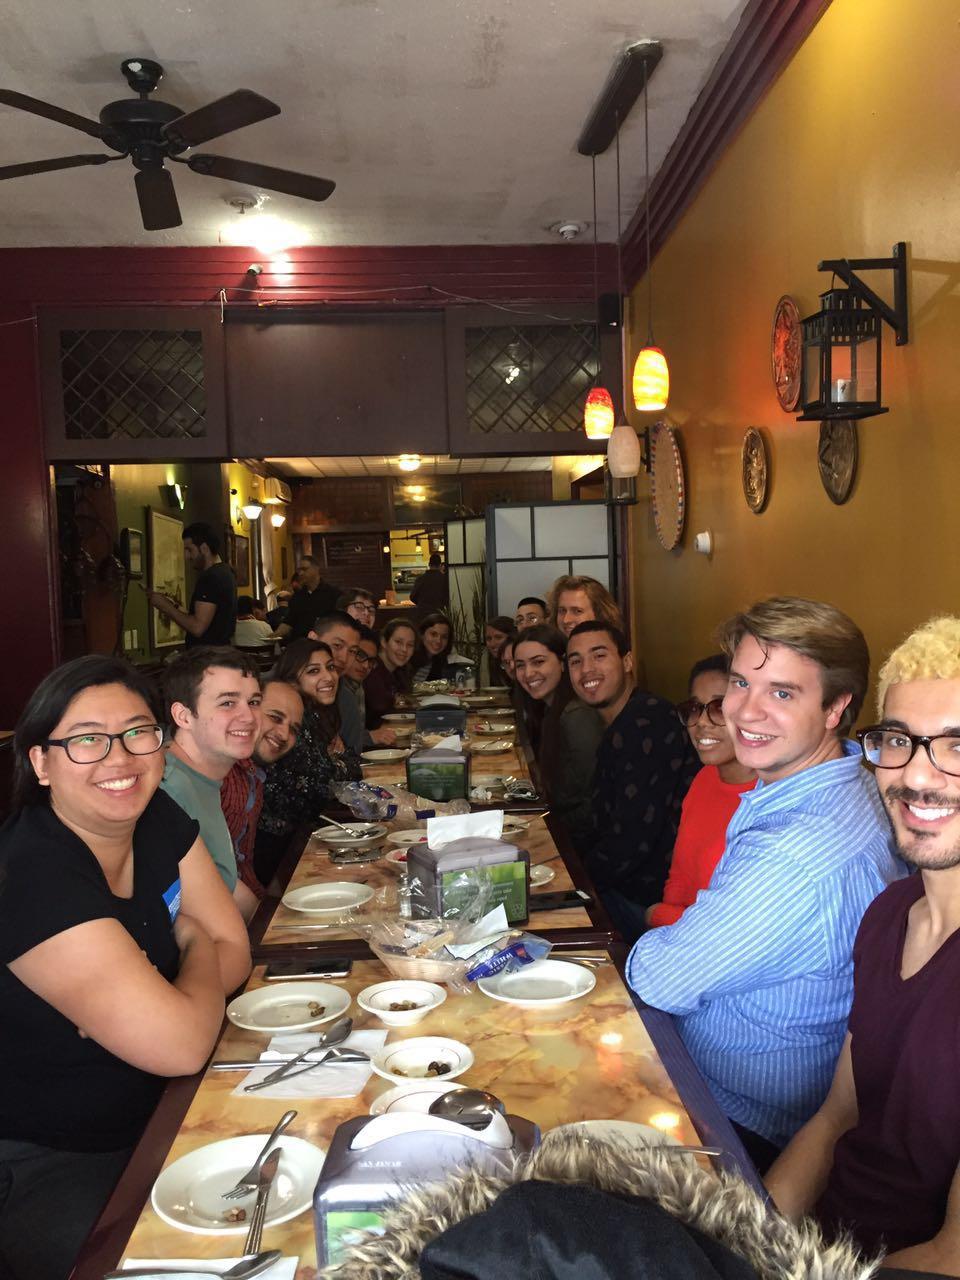 A large group of students and faculty sit at a table in a restaurant, smiling at the camera